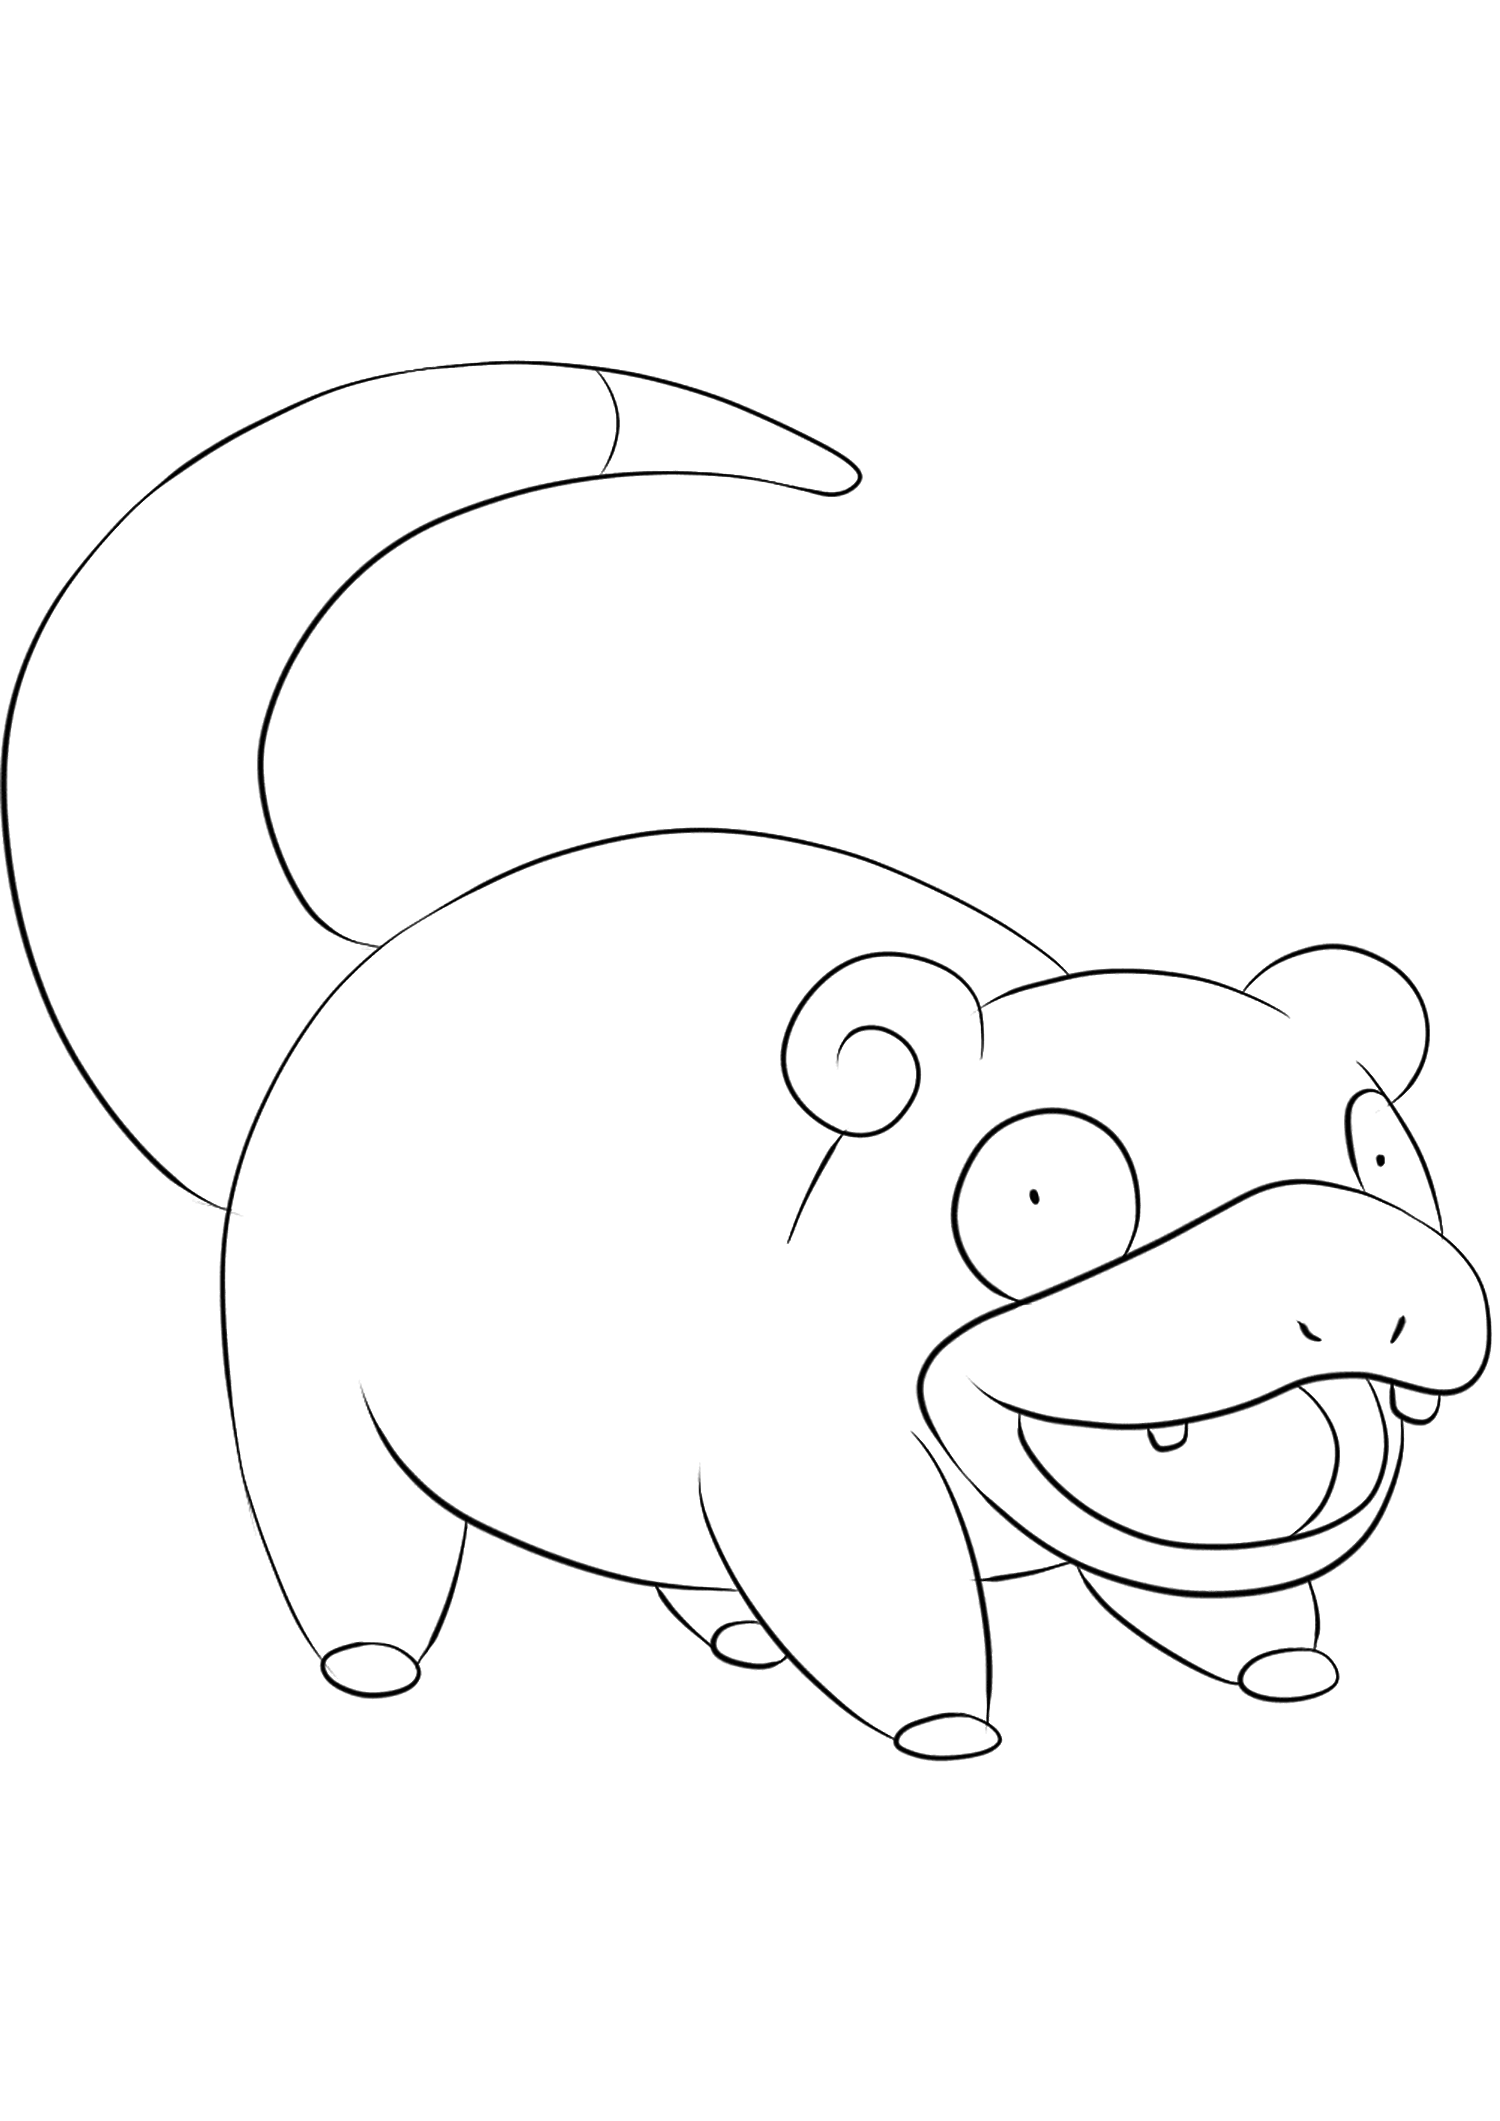 Slowpoke (No.79). Slowpoke Coloring page, Generation I Pokemon of type Water and PsychicOriginal image credit: Pokemon linearts by Lilly Gerbil on Deviantart.Permission:  All rights reserved © Pokemon company and Ken Sugimori.